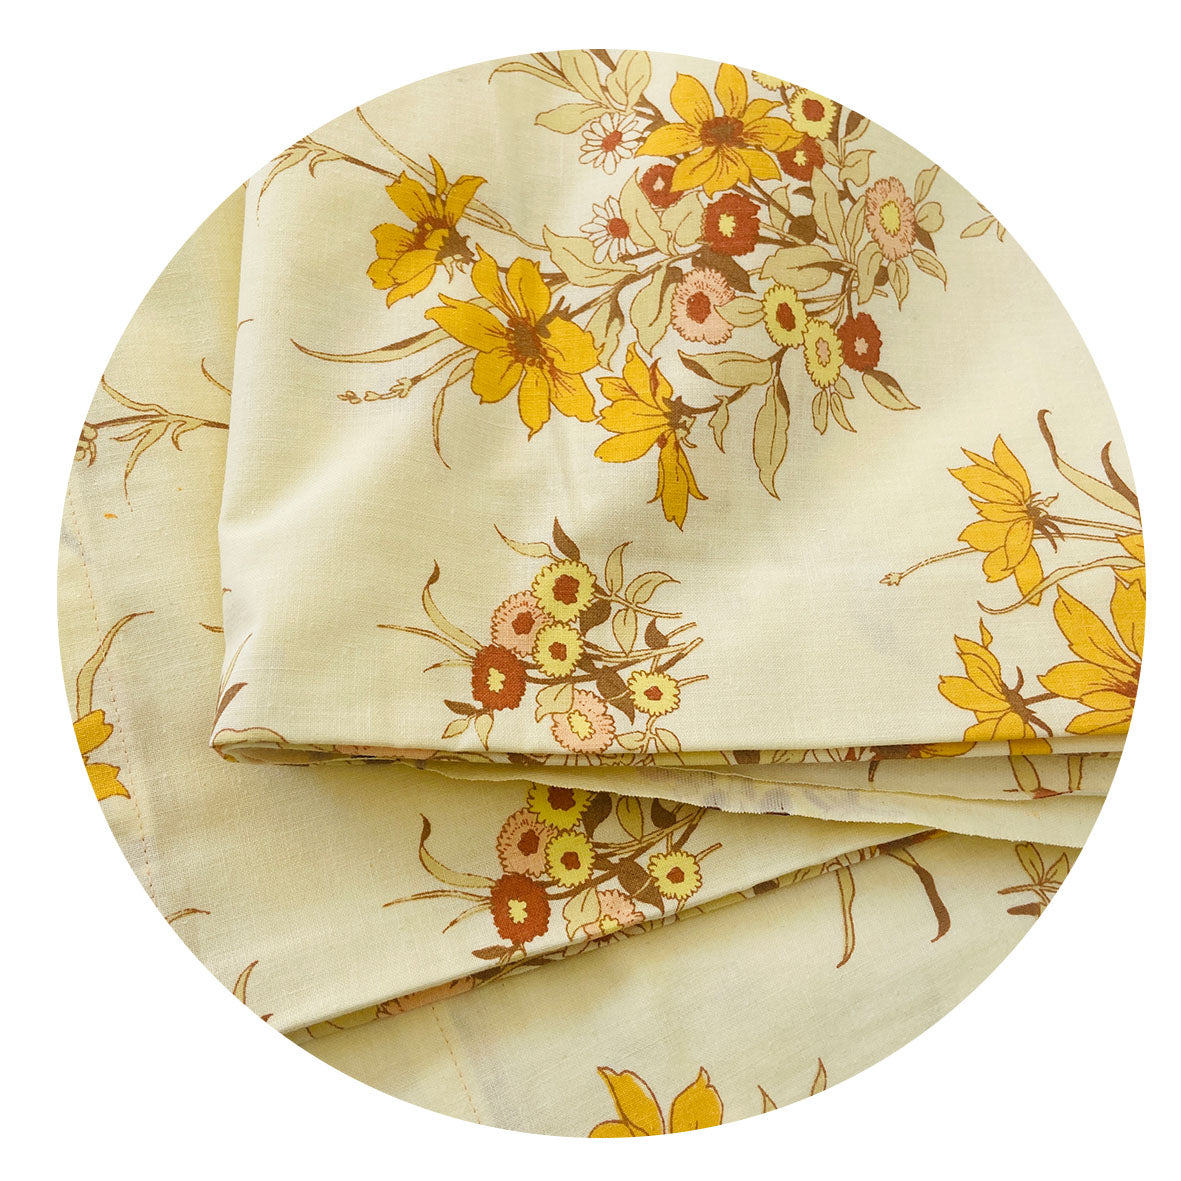 260cms Vintage Thick All Cotton Yellow FLORAL Sheet Fabric